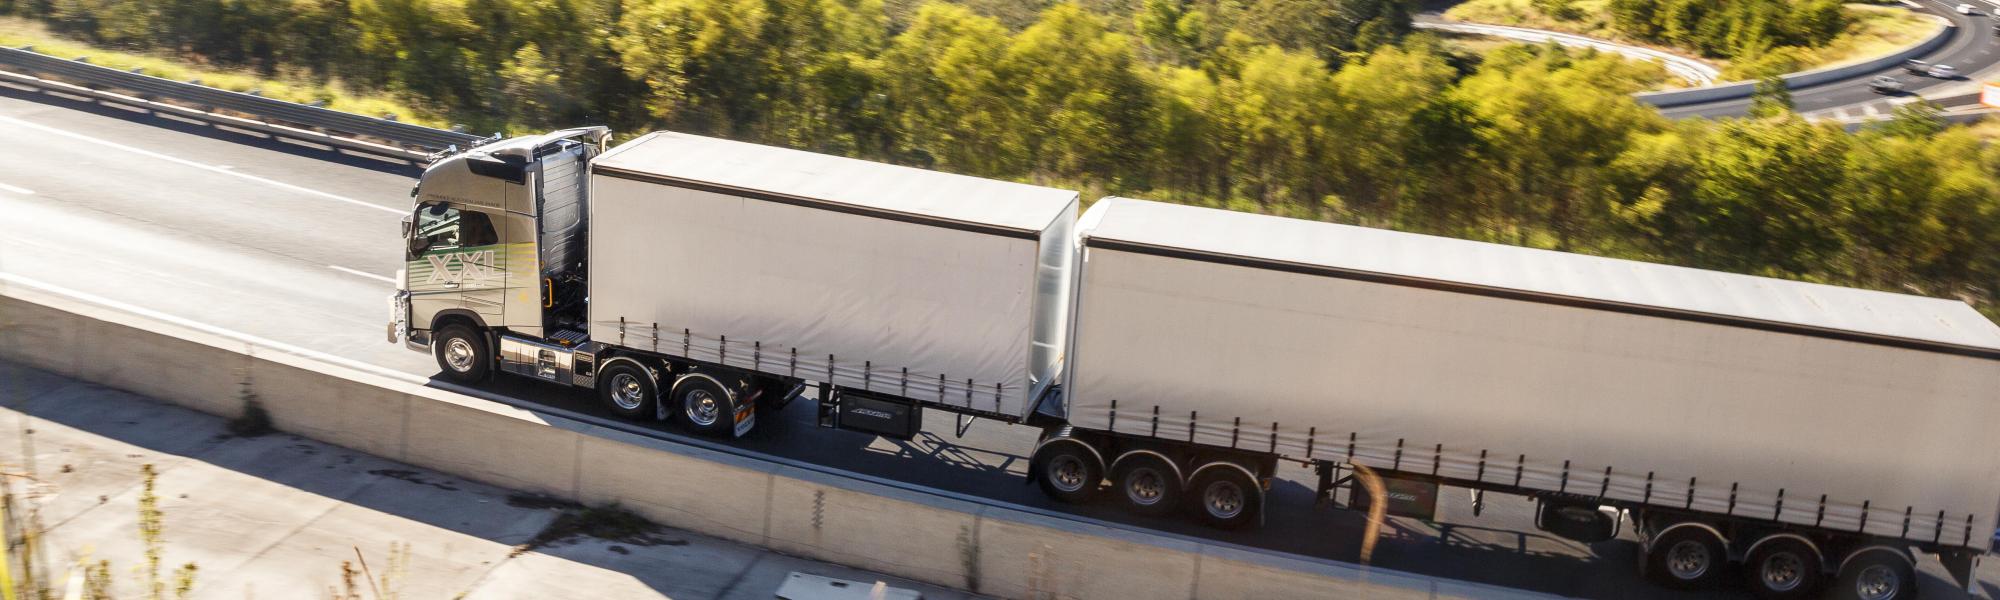 IRU lays out Eco-truck plan to accelerate decarbonisation